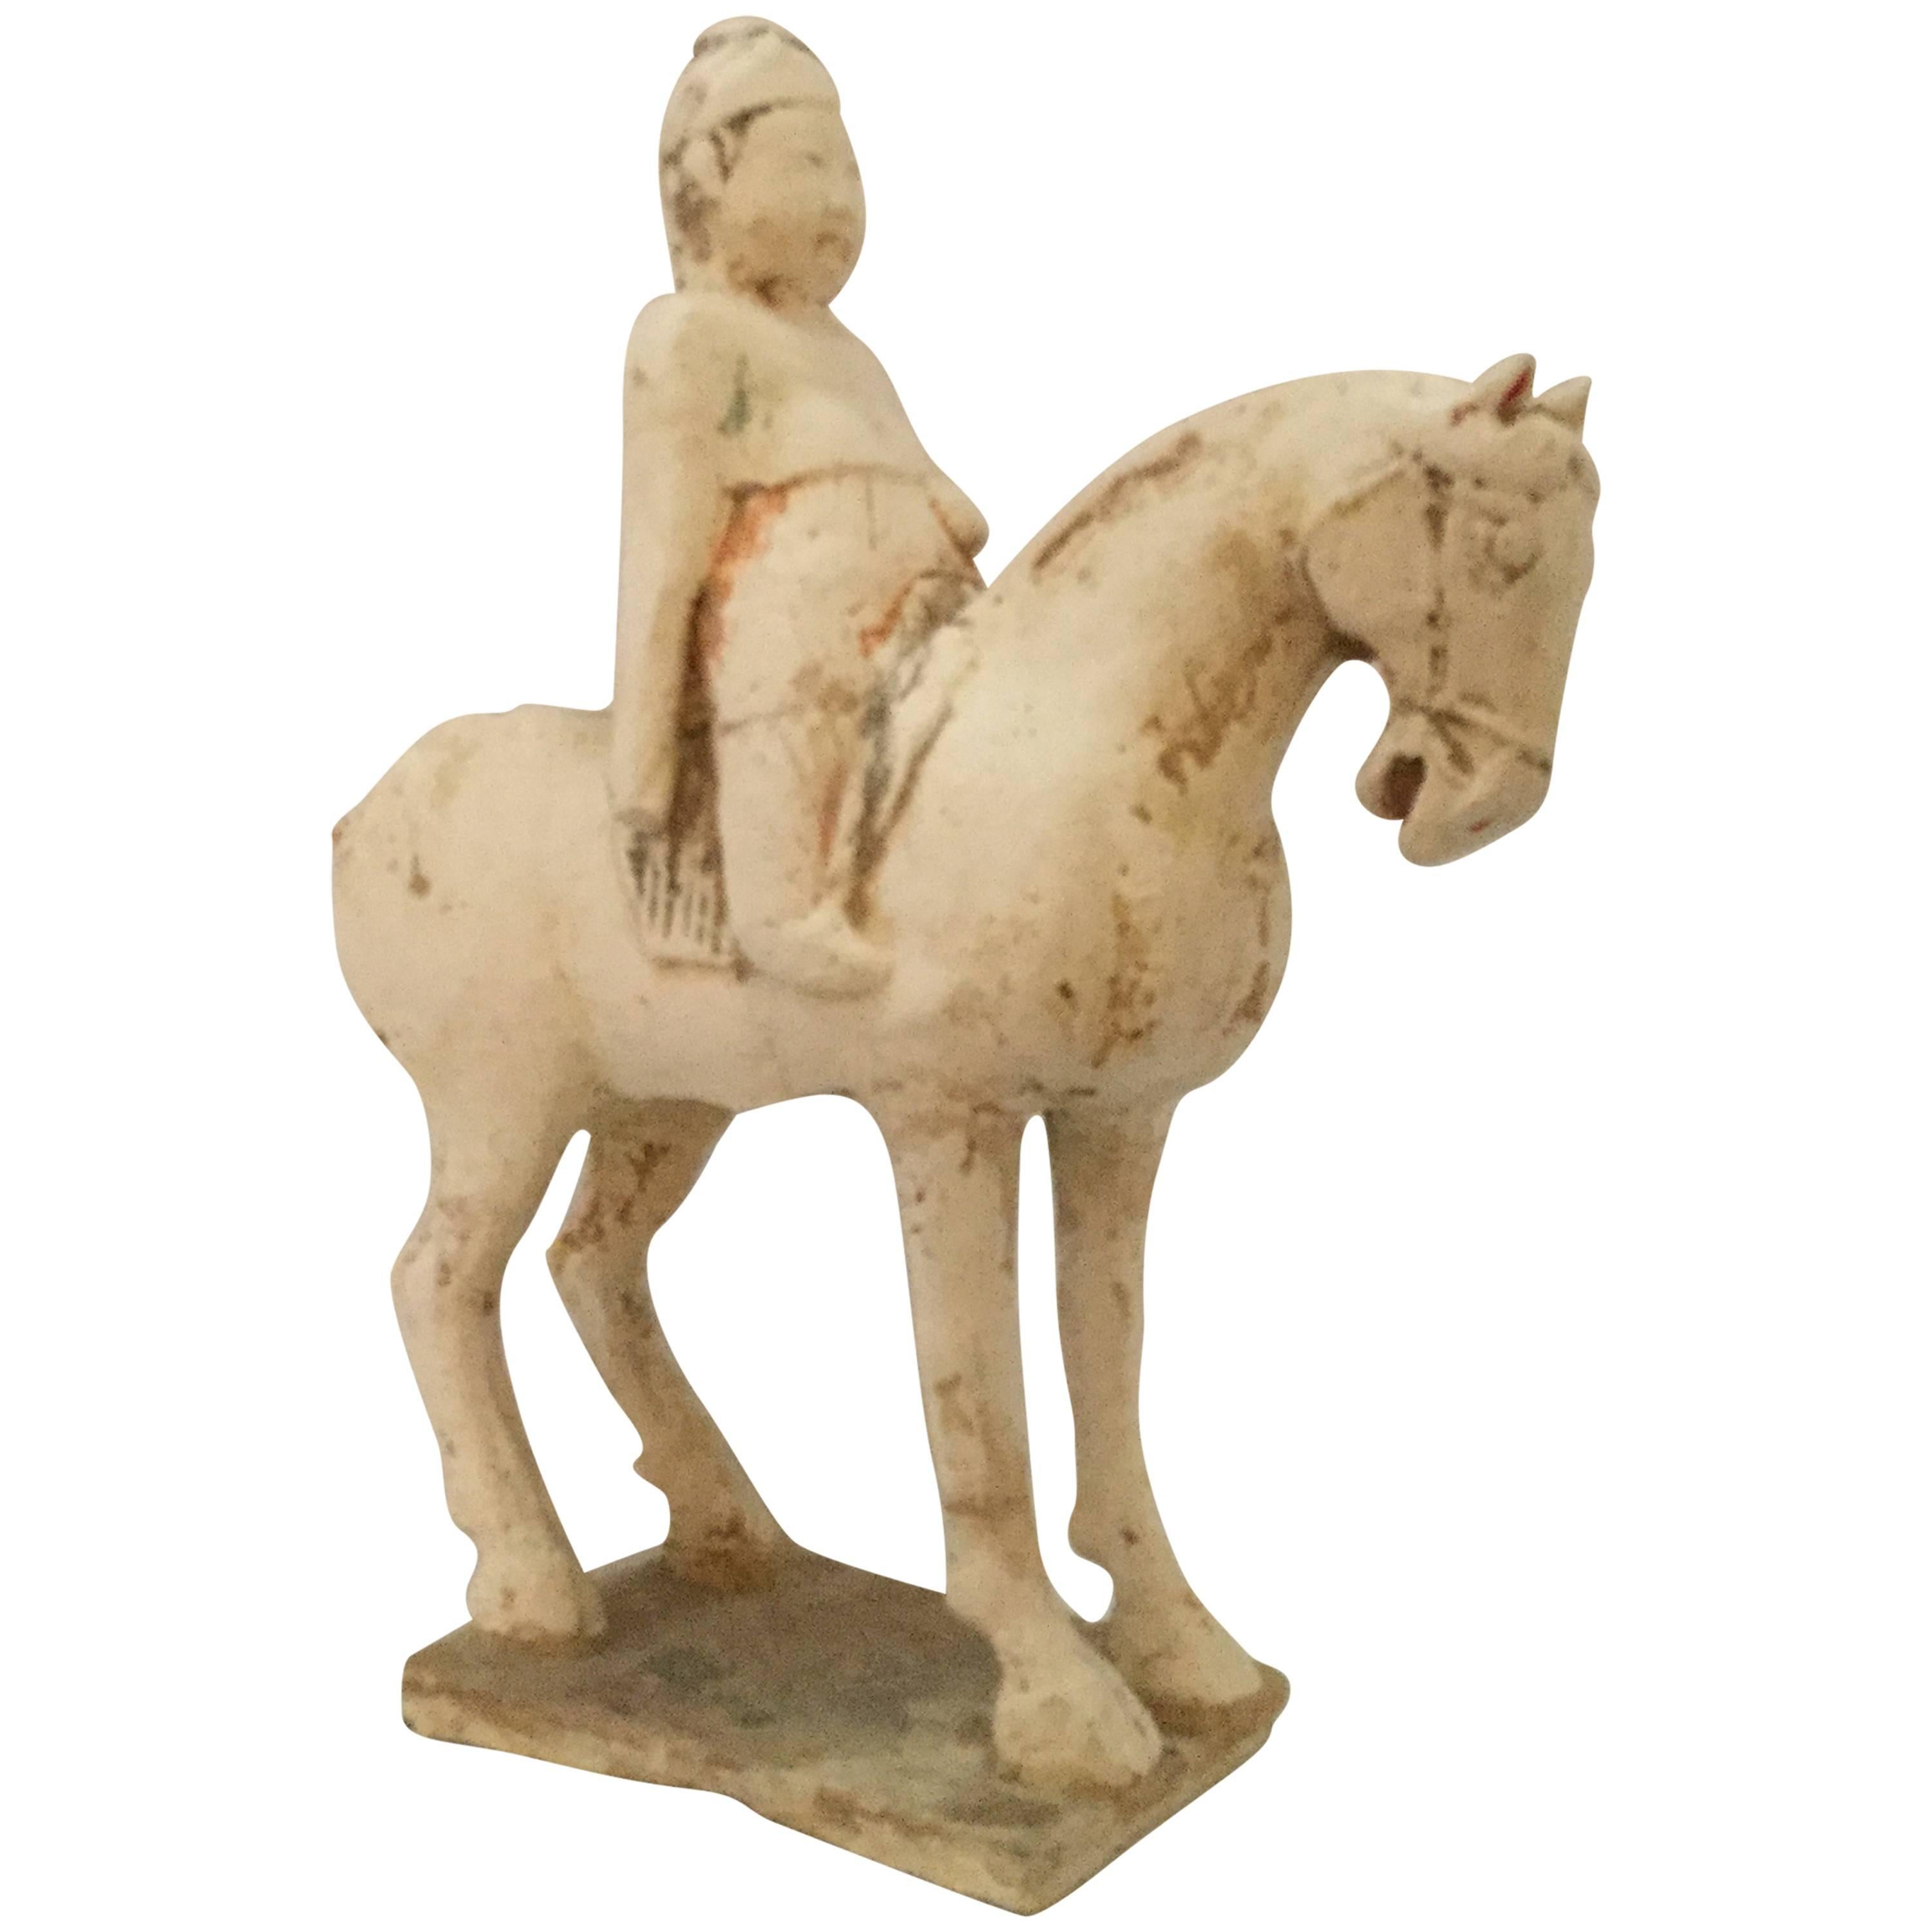 1, 000-1, 600 Year-Old 'Sui Dynasty' Burial Horse Sculpture For Sale